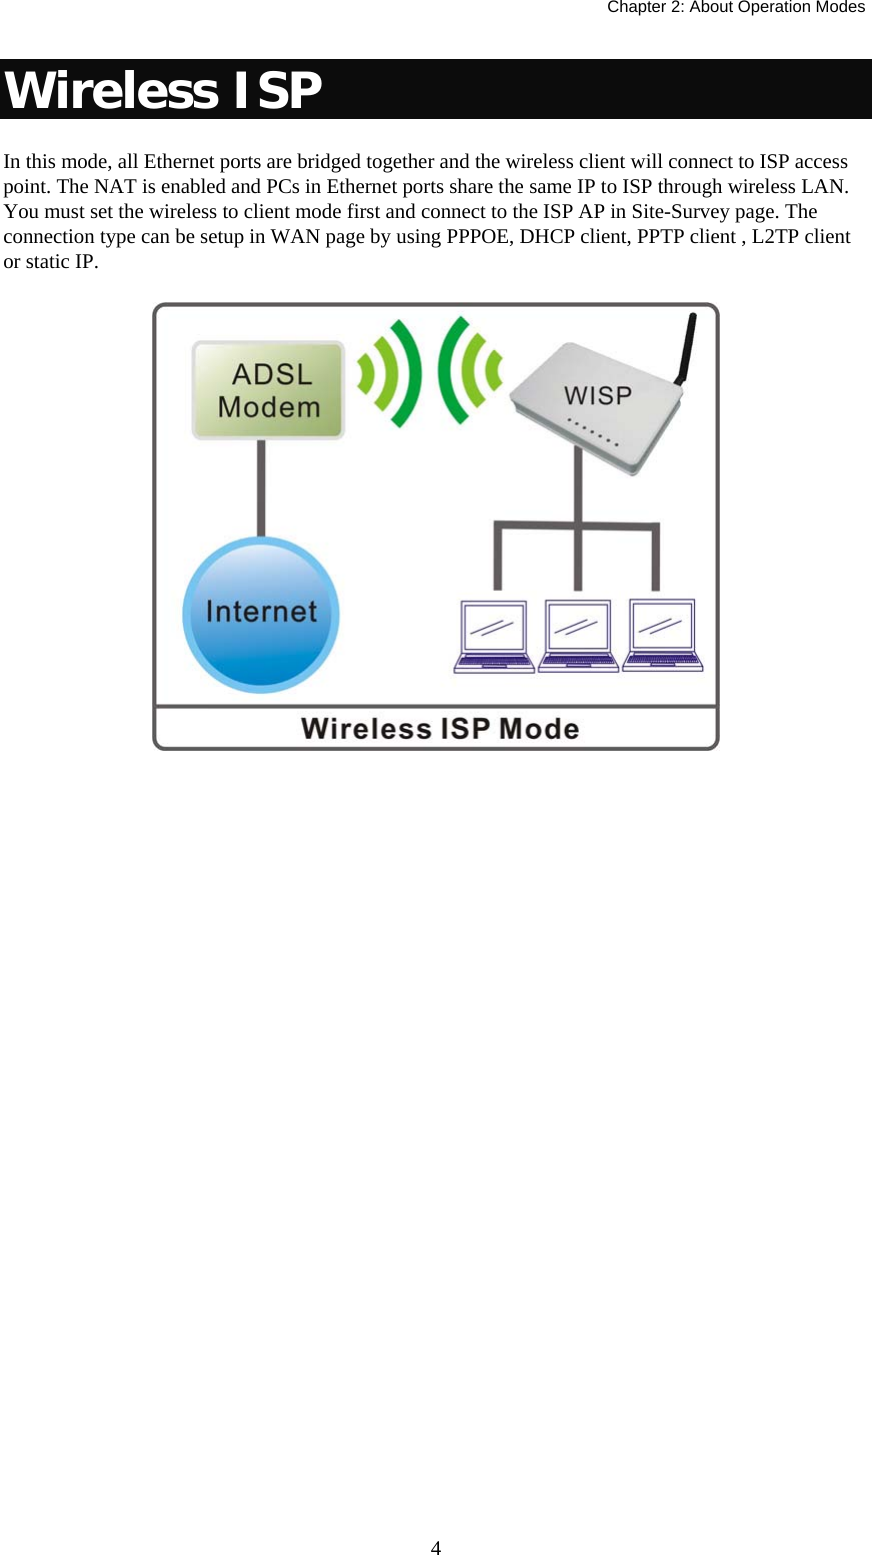   Chapter 2: About Operation Modes  4Wireless ISP In this mode, all Ethernet ports are bridged together and the wireless client will connect to ISP access point. The NAT is enabled and PCs in Ethernet ports share the same IP to ISP through wireless LAN. You must set the wireless to client mode first and connect to the ISP AP in Site-Survey page. The connection type can be setup in WAN page by using PPPOE, DHCP client, PPTP client , L2TP client or static IP.  